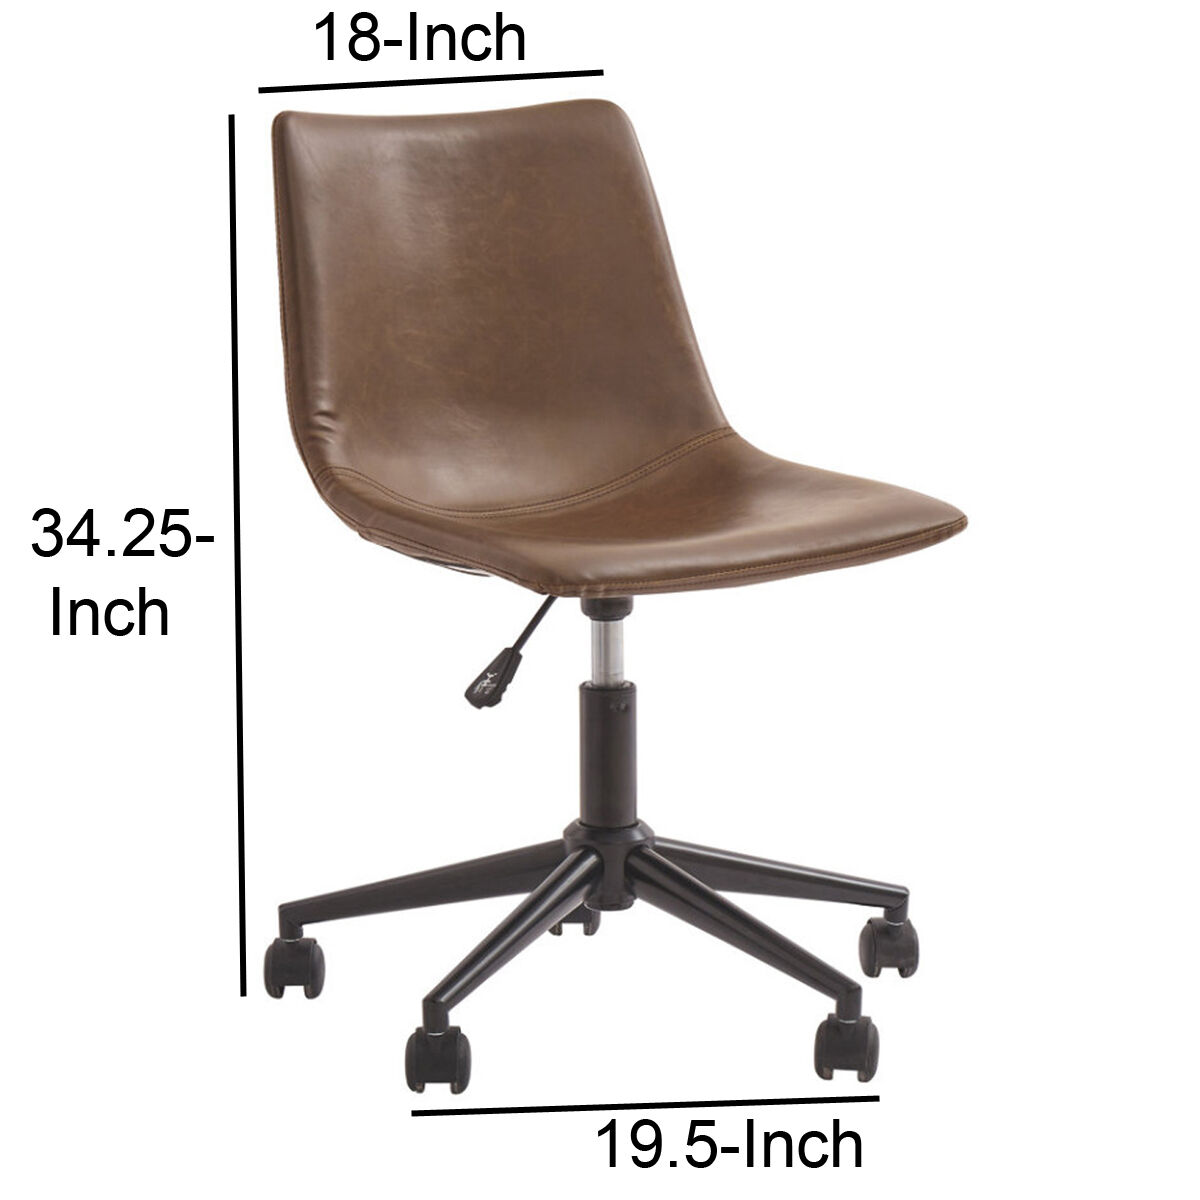 Metal Swivel Chair with Faux Leather Upholstery and Adjustable Seat, Brown and Black